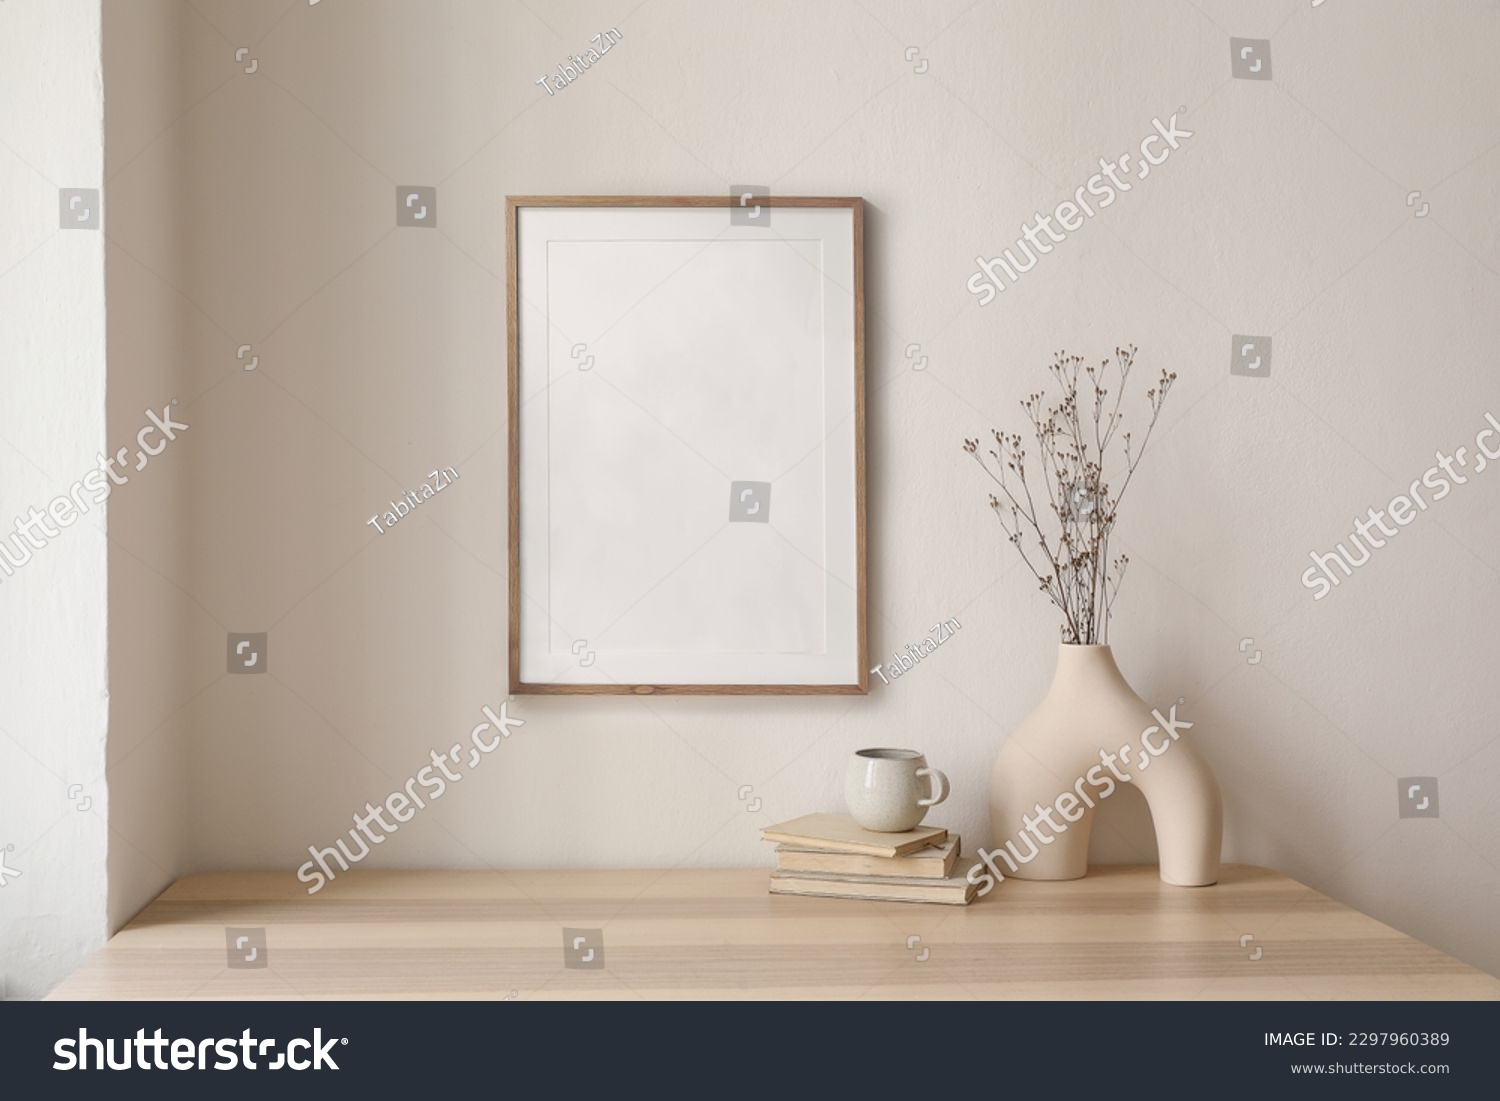 Neutral home still life. Decorative boho interior. Vase with bouquet of dry plants, grass on wooden table. Blank picture frame mockup hanging on wall. White cup of coffee, books. Artistic poster. #2297960389